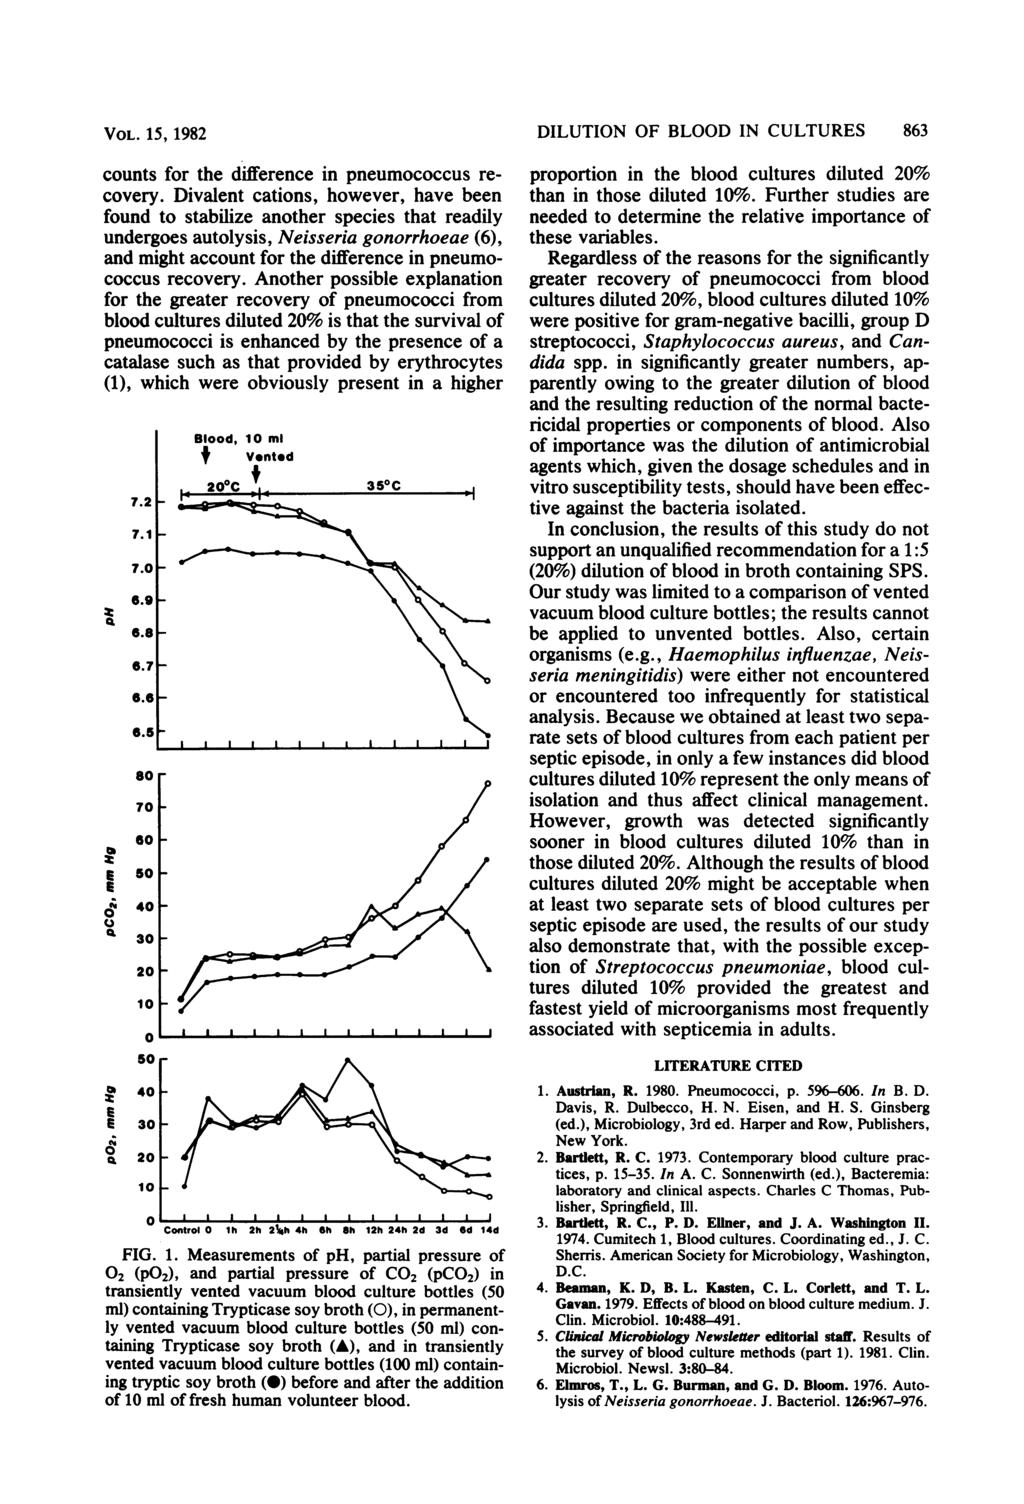 VOL. 15, 1982 counts for the difference in pneumococcus recovery.